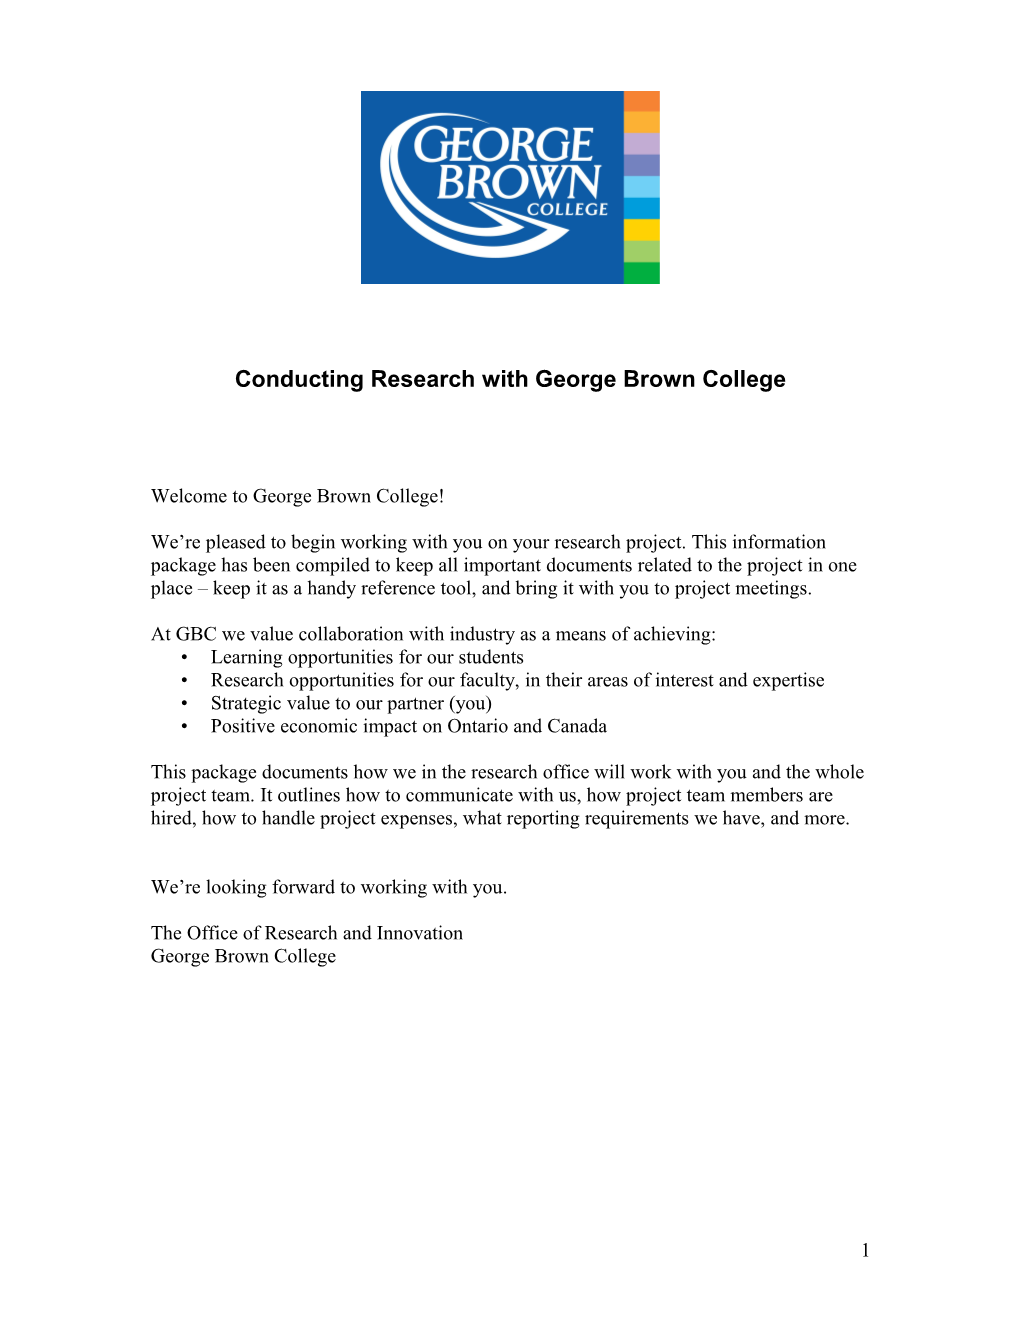 Conducting a Research Project with George Brown College